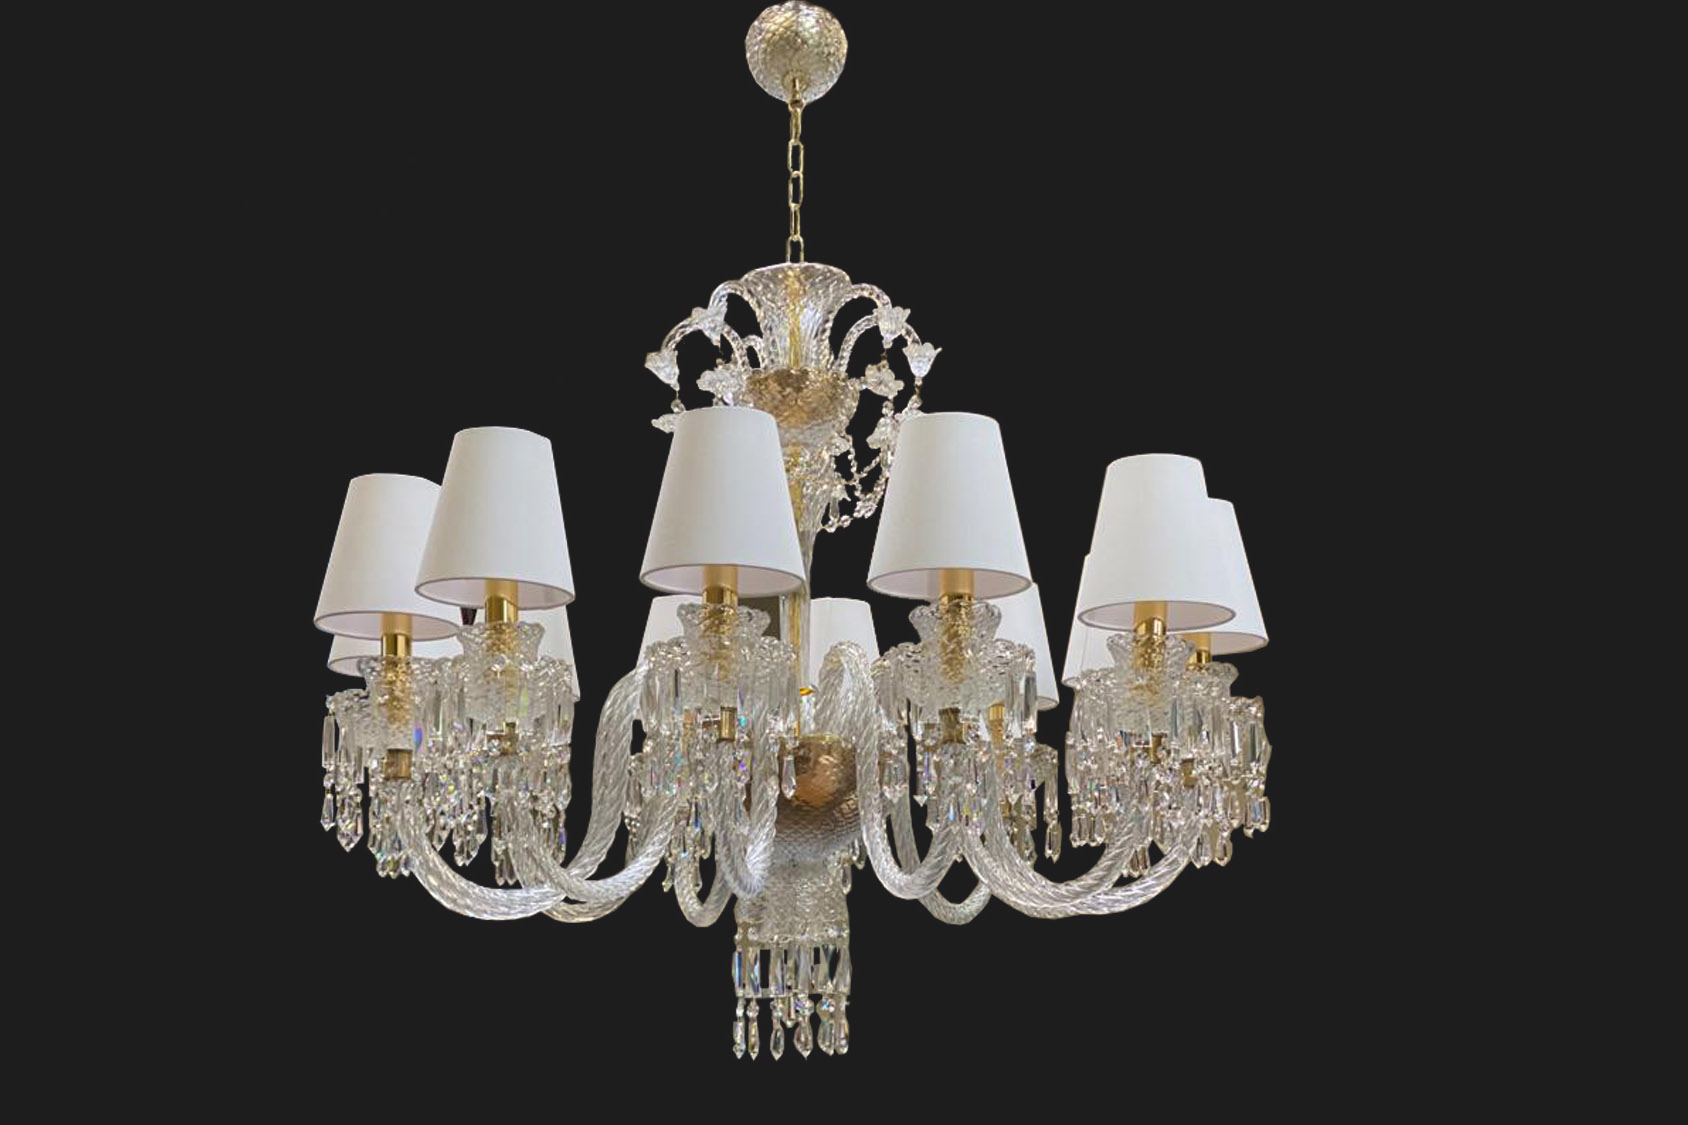 How to recognize an authentic Murano chandelier